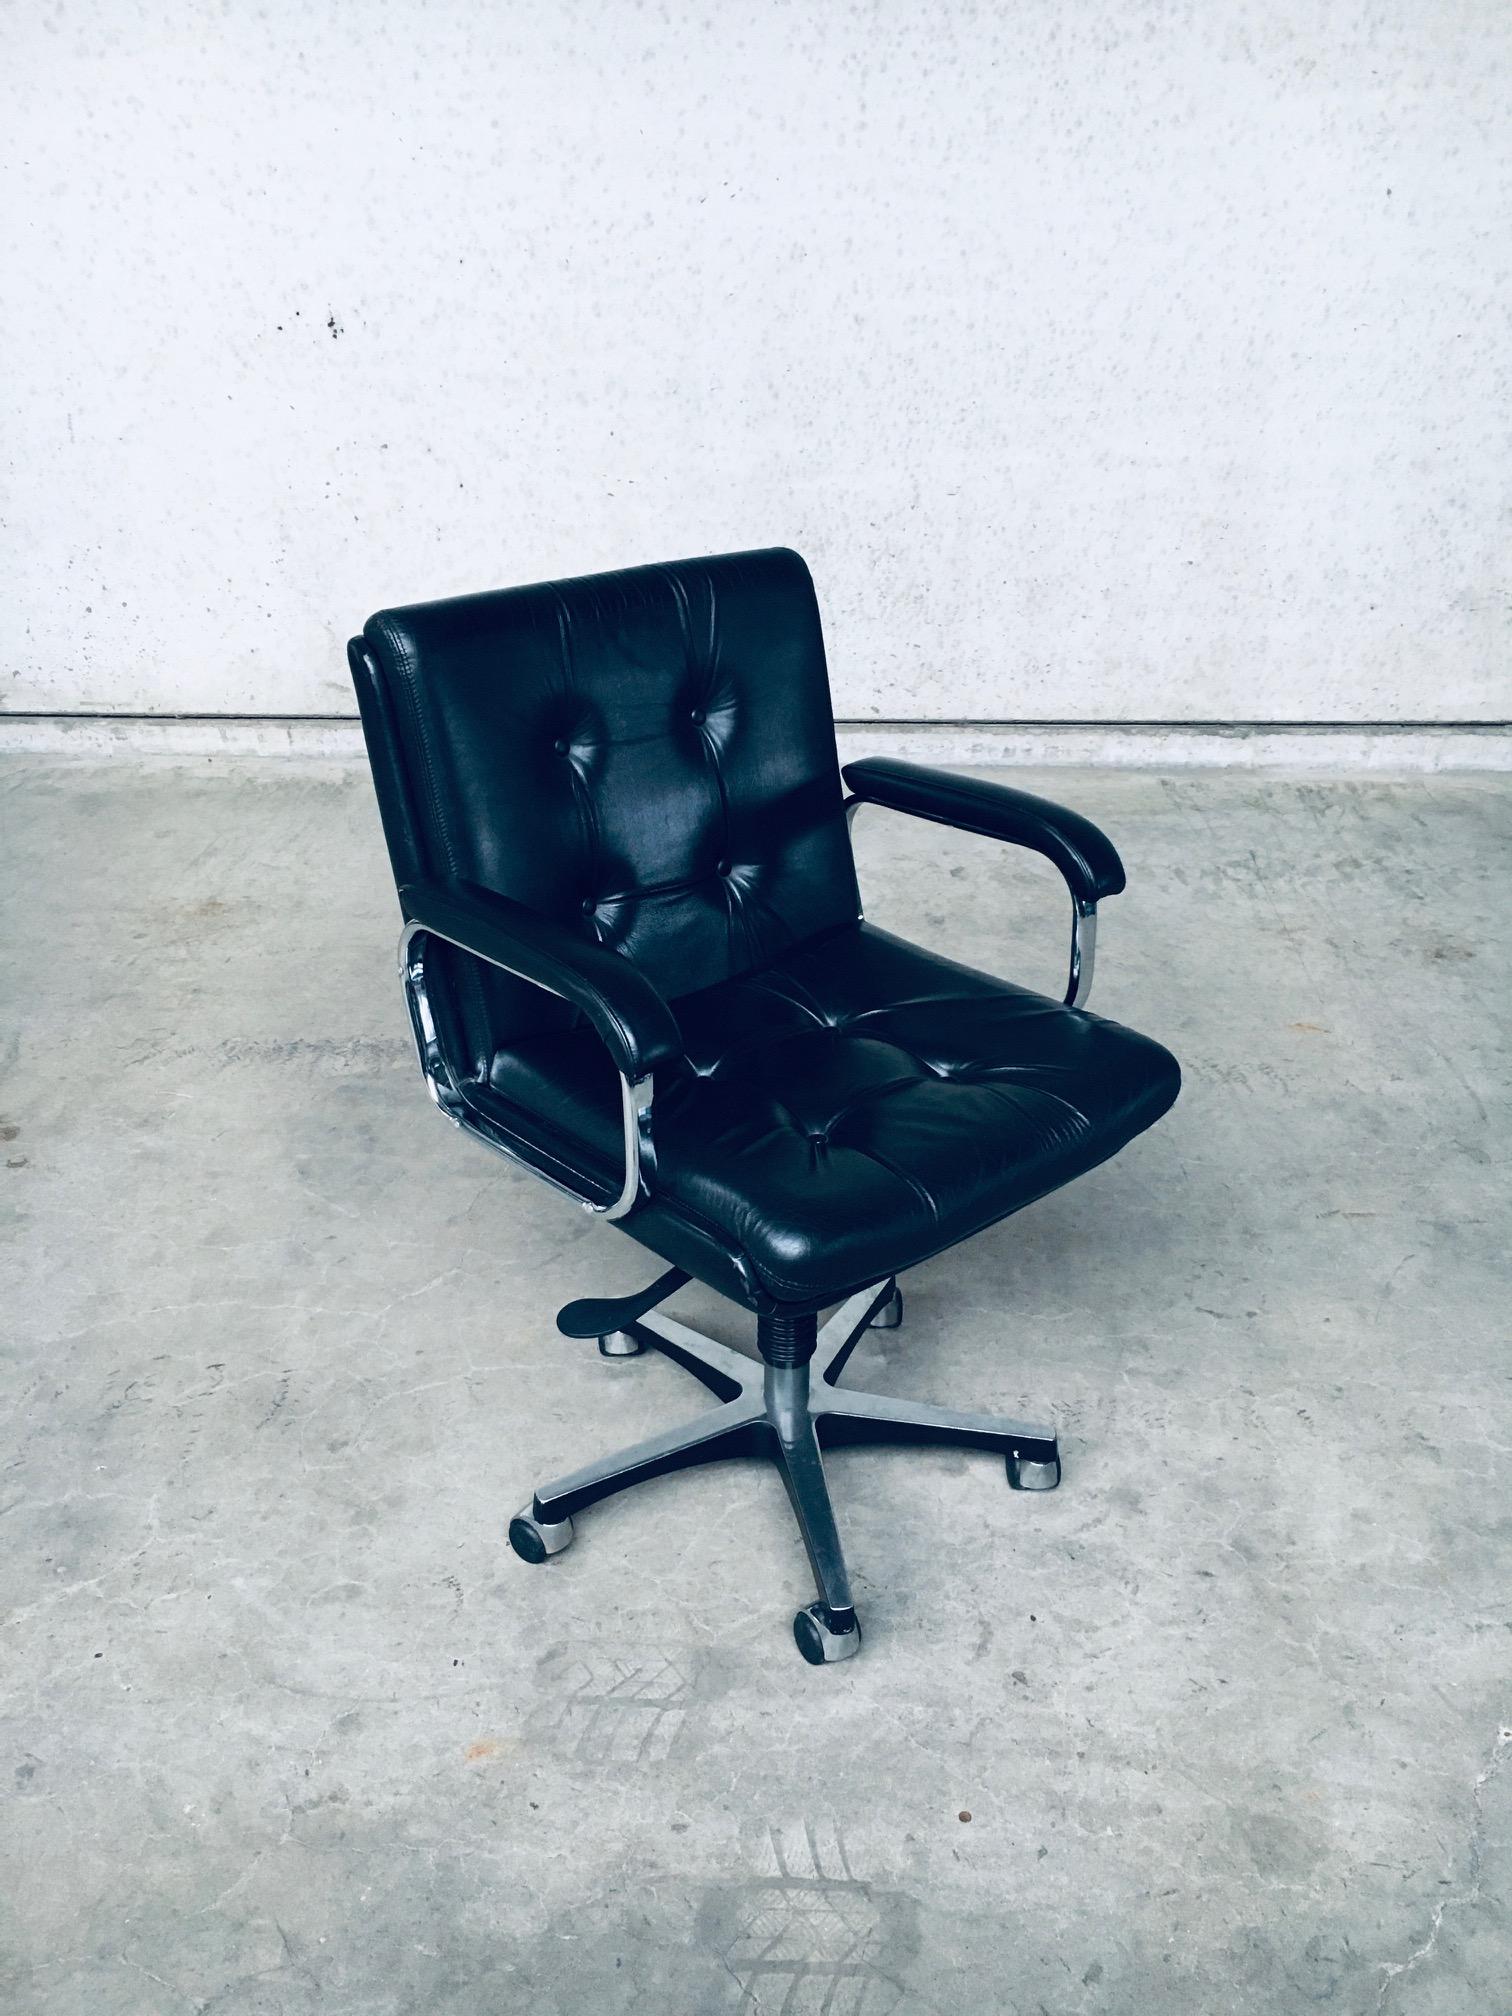 Vintage Mid-Century Modern Scandinavian Design leather office desk chair, made in Italy, 1988. Marked on the bottom of the chair, Made in Italy - 1988. This is exactly like the office chair by Ring Mekanikk of Norway, 1960s, but this is marked, Made